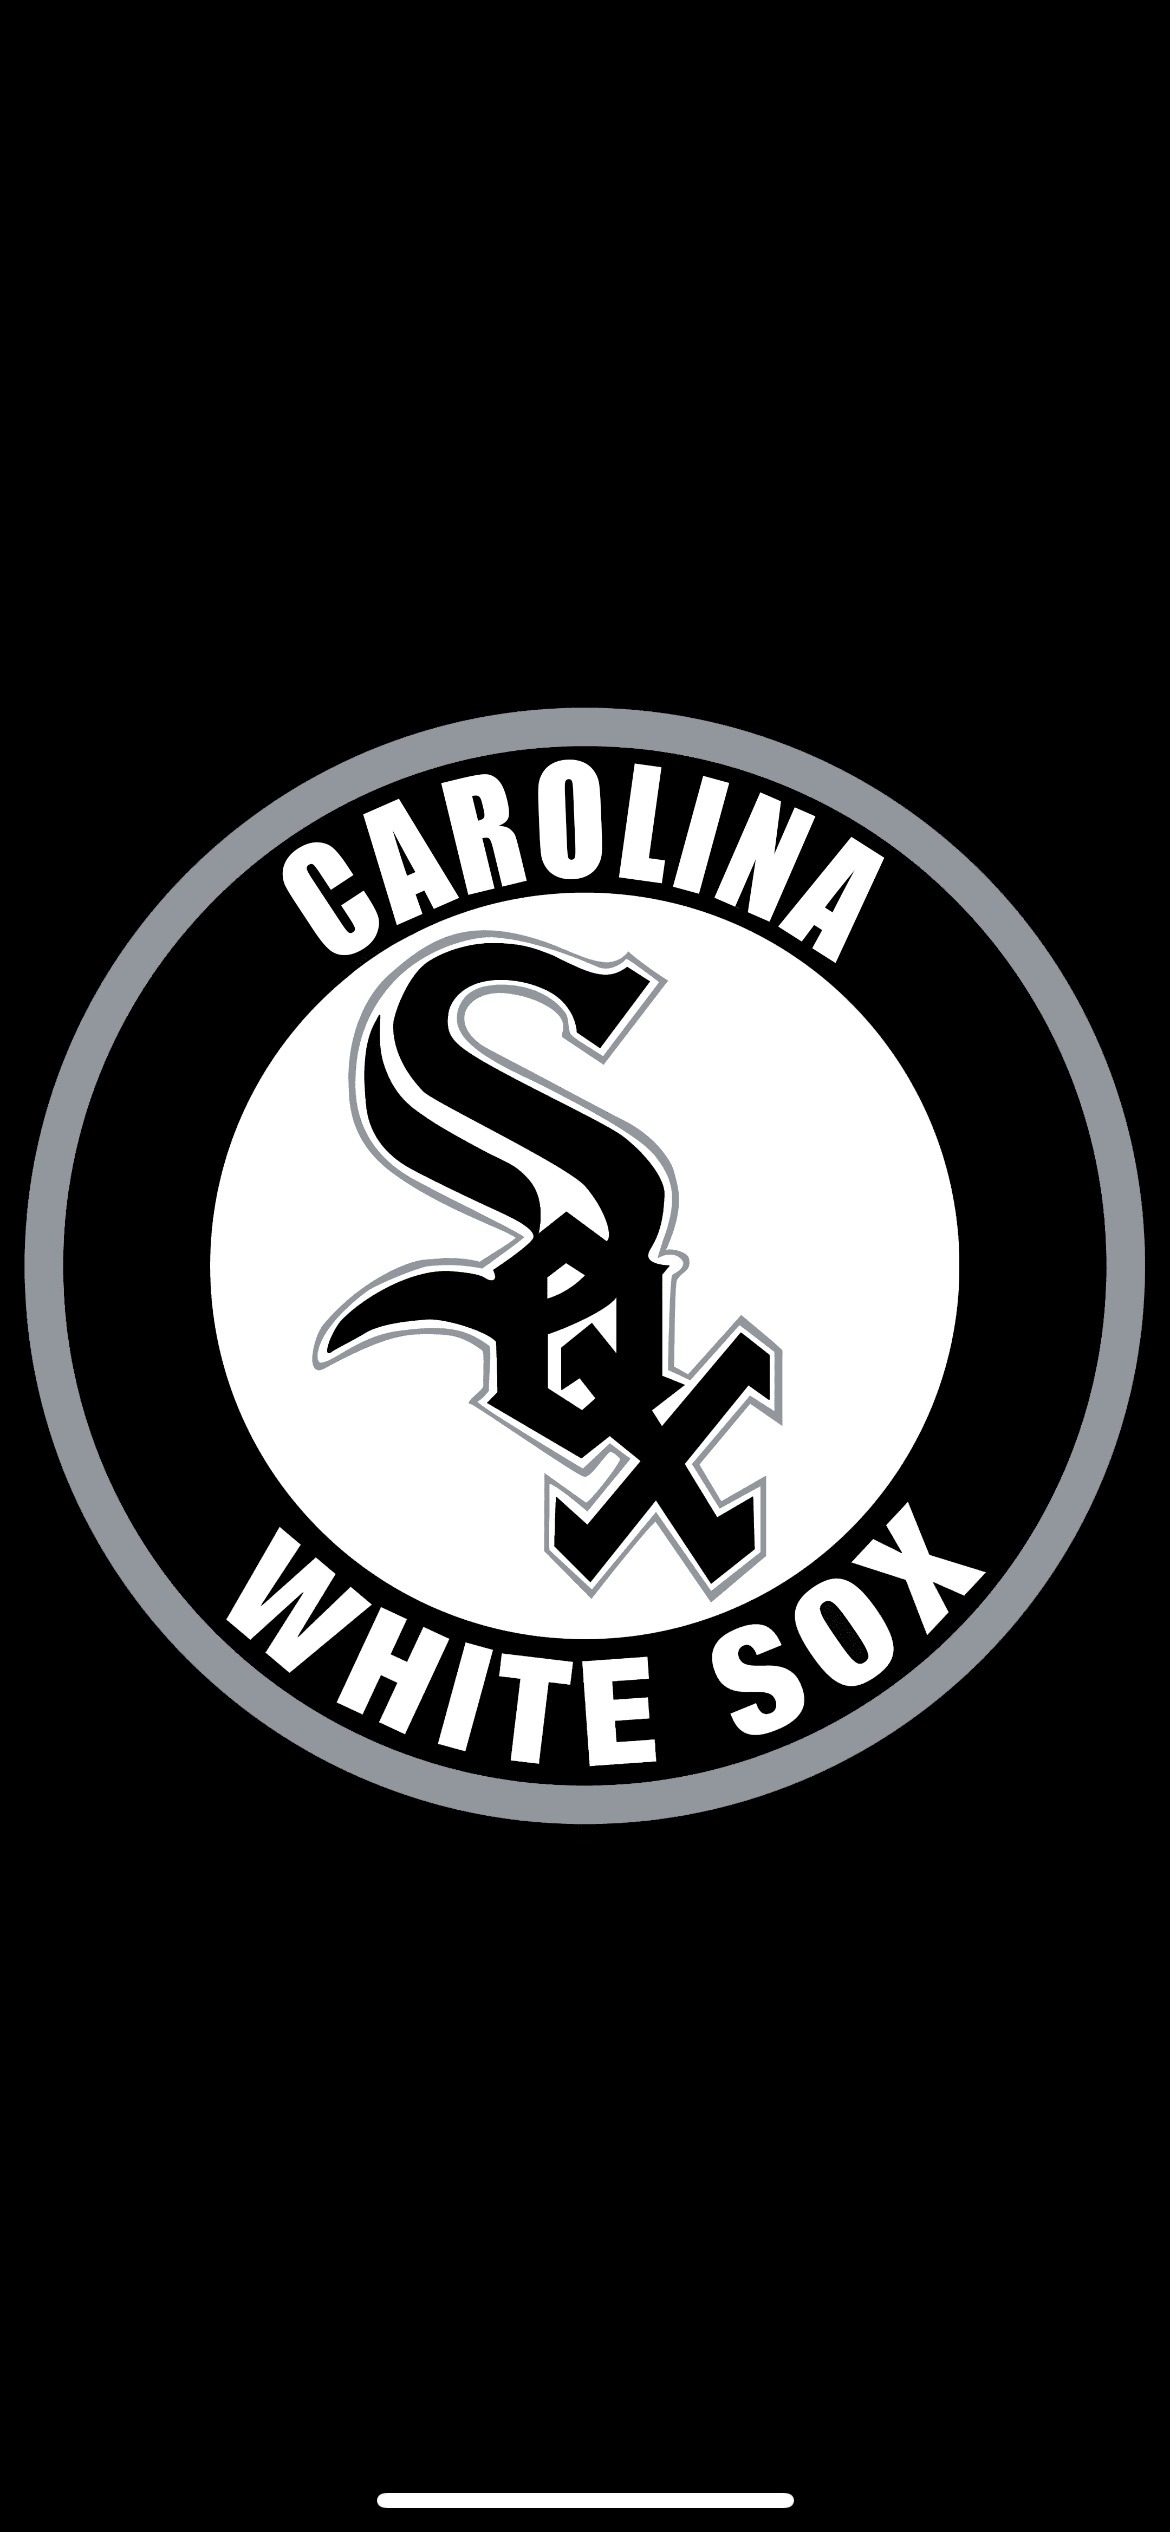 Chicago White Sox on Twitter Its Wallpaper Wednesday  Head over to  our Instagram Story to download this weeks wallpapers designed by WhiteSox  Senior Graphic Designer Brigid Thomas httpstco9cArxvF0H8  Twitter